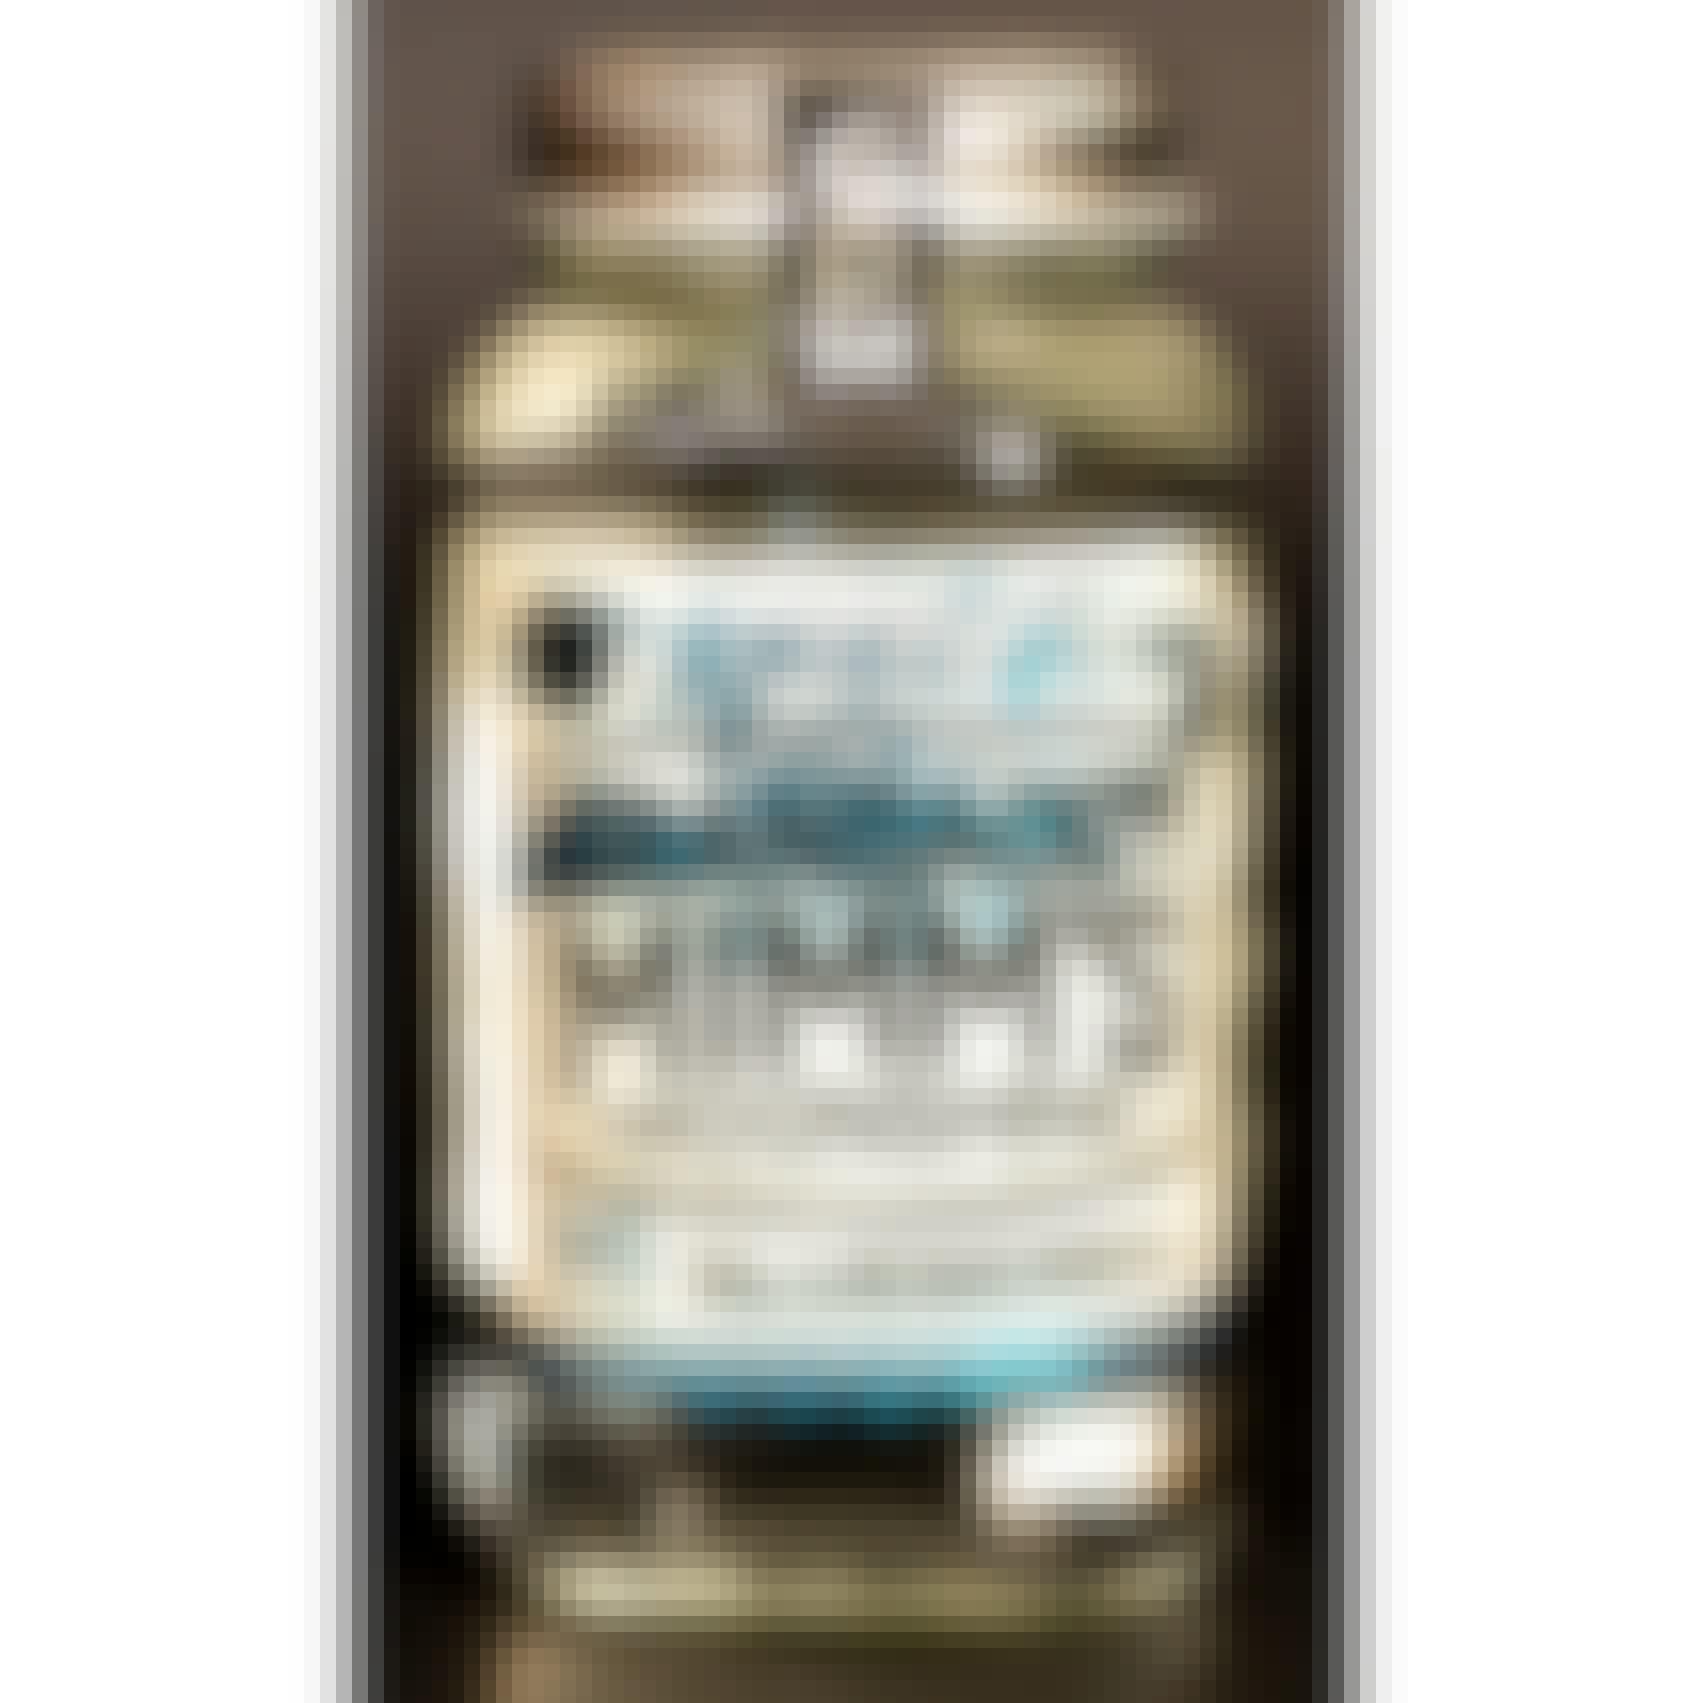 Grandaddy Mimm's Moonshine Handcrafted Blueberry 750ml